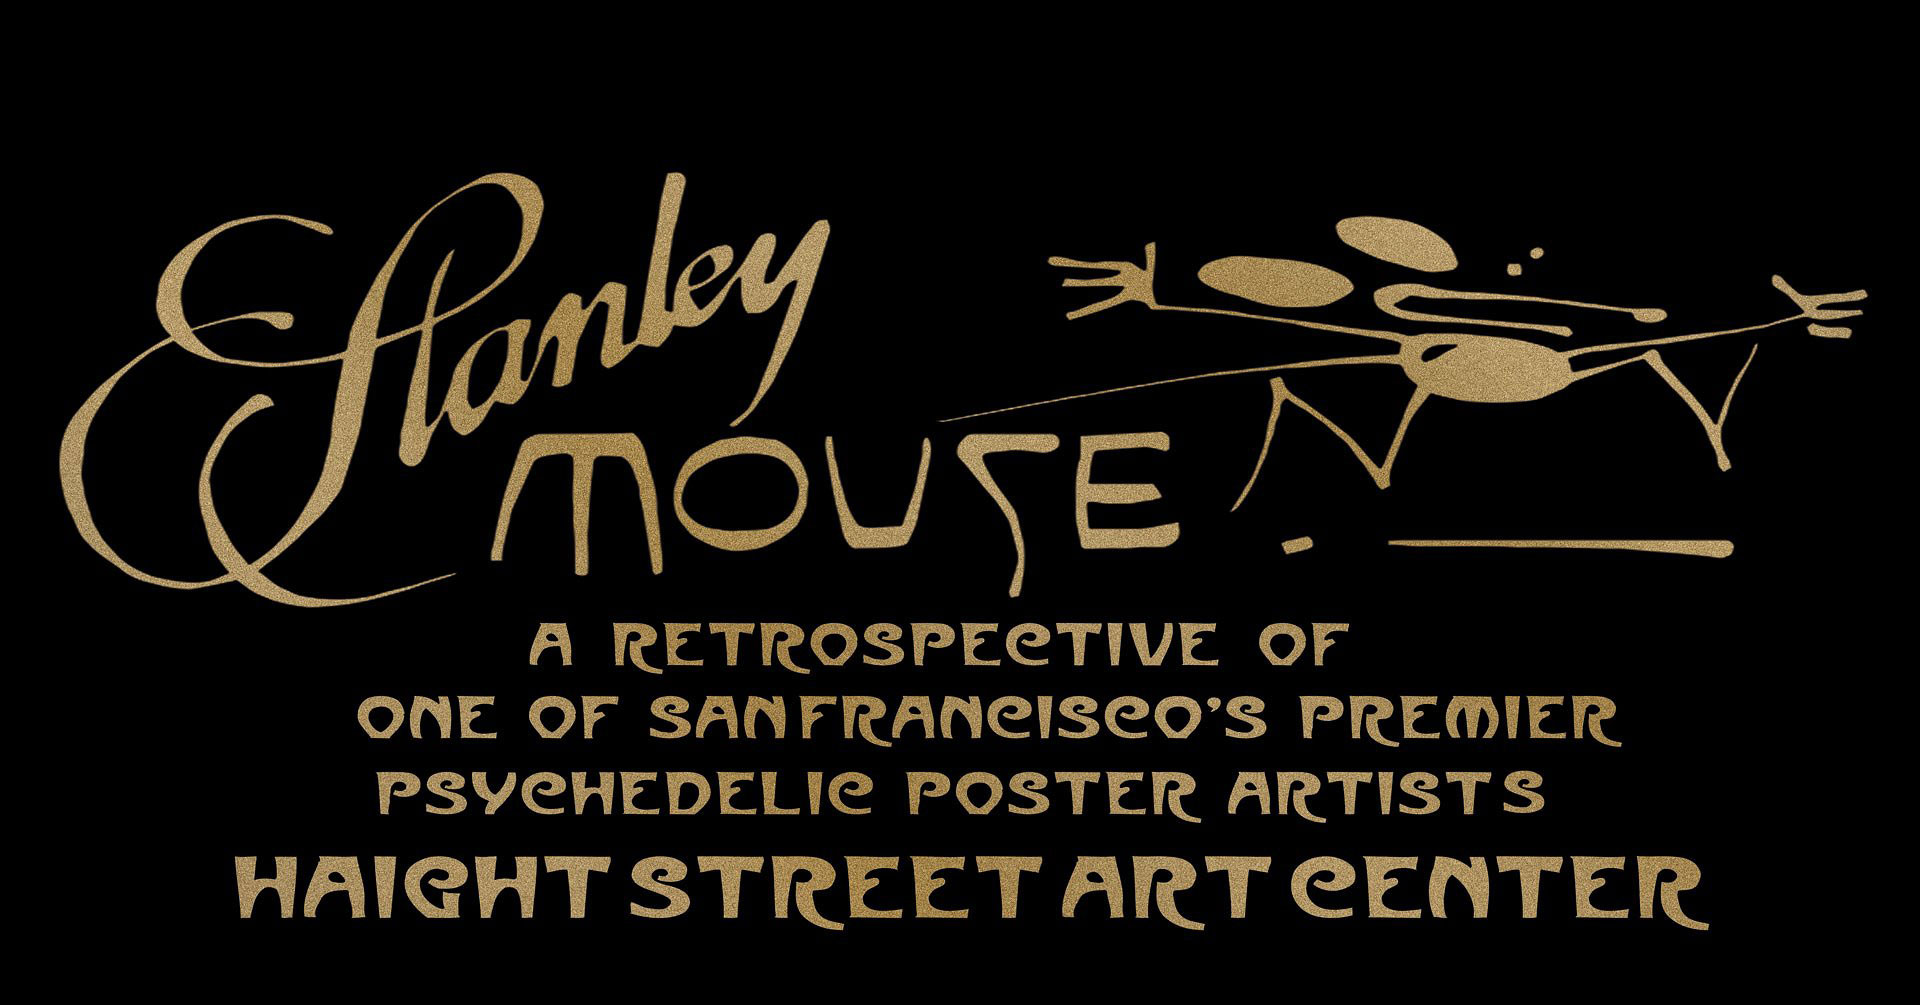 Stanley Mouse A Retrospective of One of San Francisco's Premier Psychedelic Poster Artists Haight Street Art Center